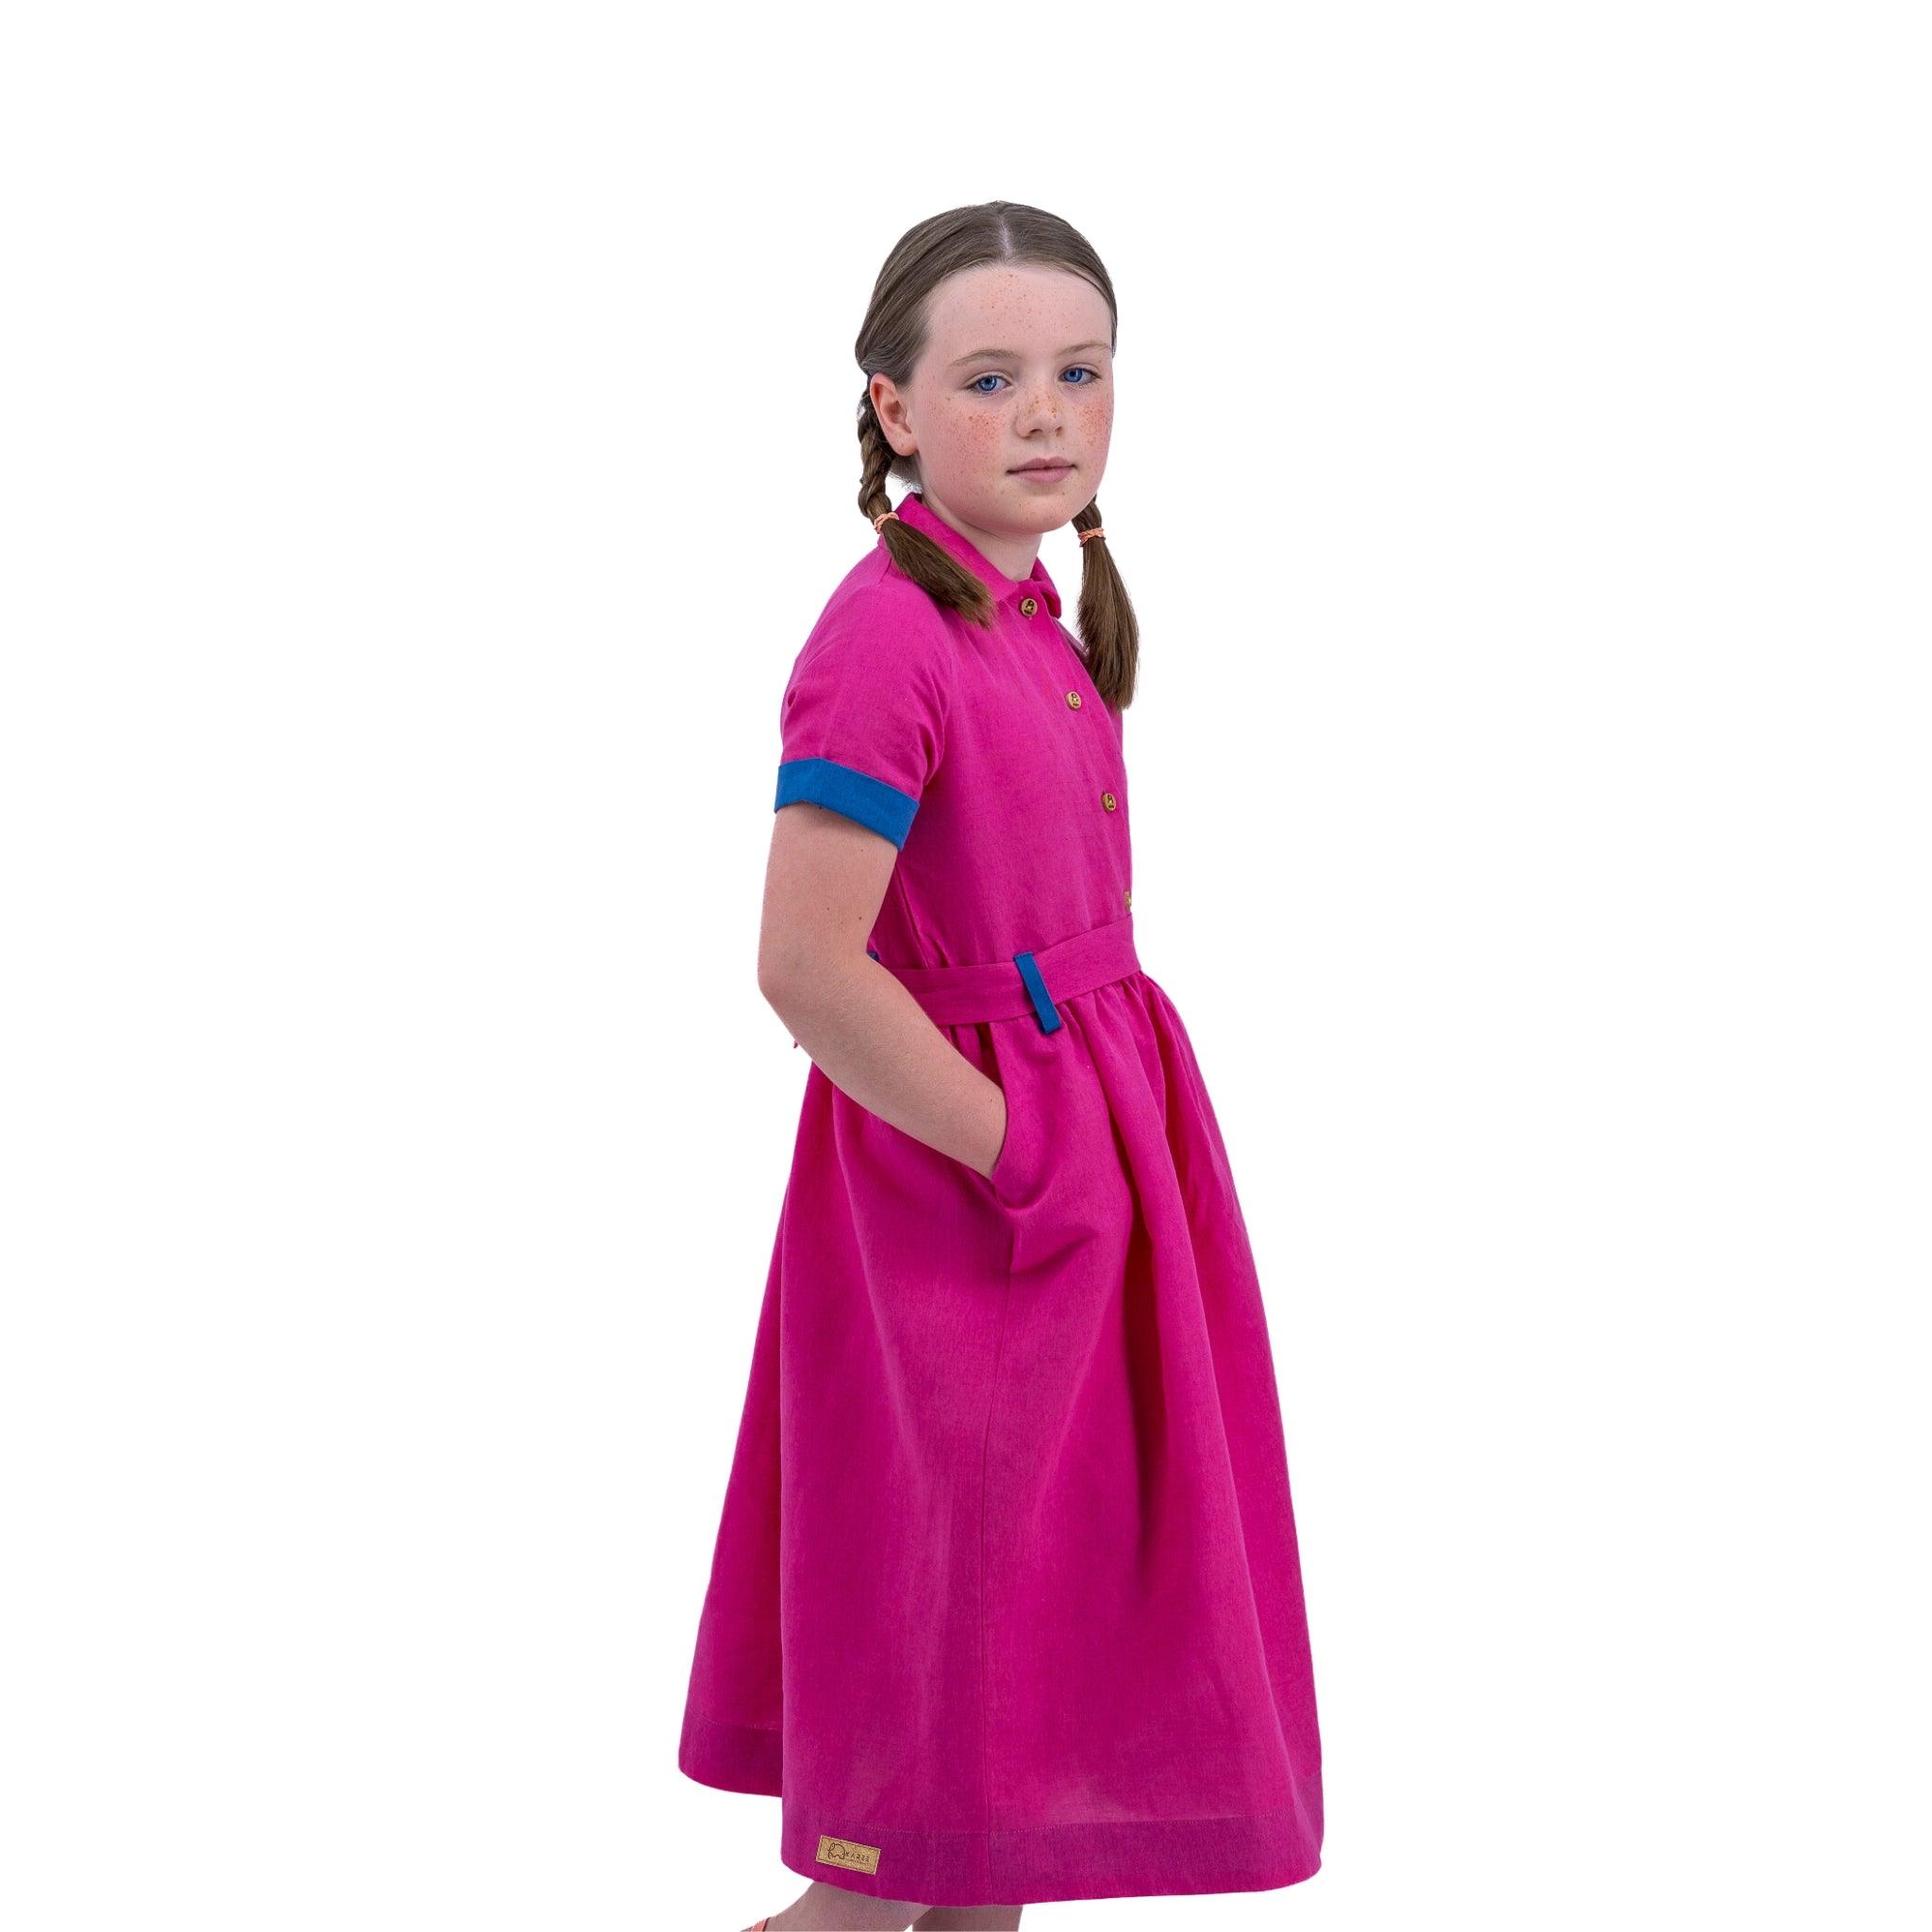 Young girl with braids wearing a Karee Fuchsia Purple Linen Dress for Girls standing against a white background.